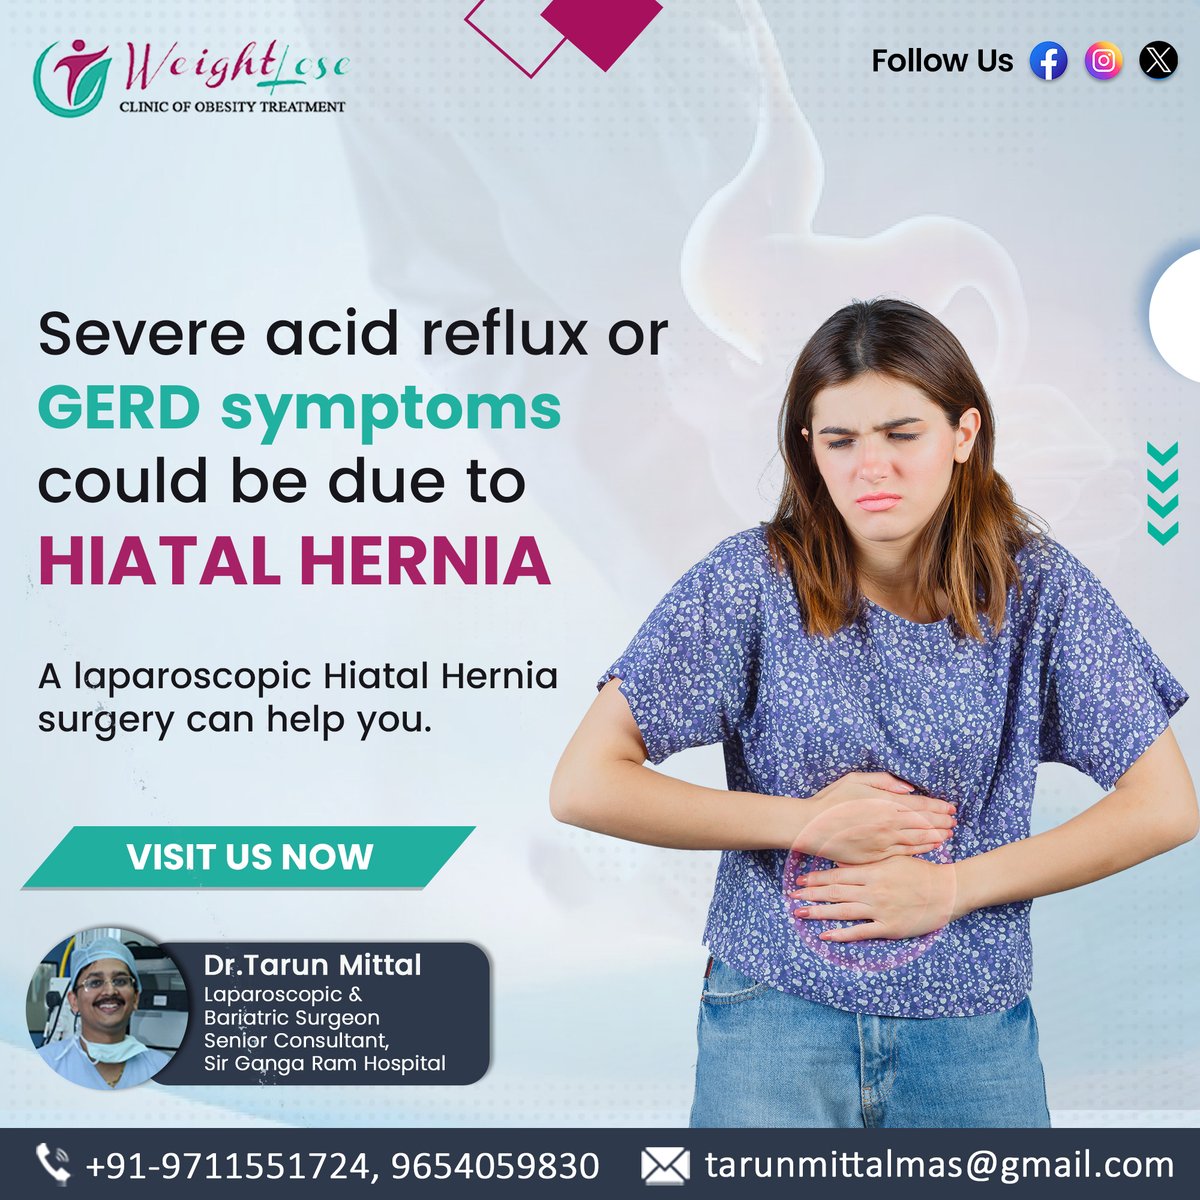 Struggling with severe acid reflux or GERD symptoms? It could be due to a hiatal hernia. Don't suffer in silence. Explore the benefits of laparoscopic hiatal hernia surgery. Visit us now for relief and reclaim your comfort!

Visit Now: bit.ly/3NEKbek